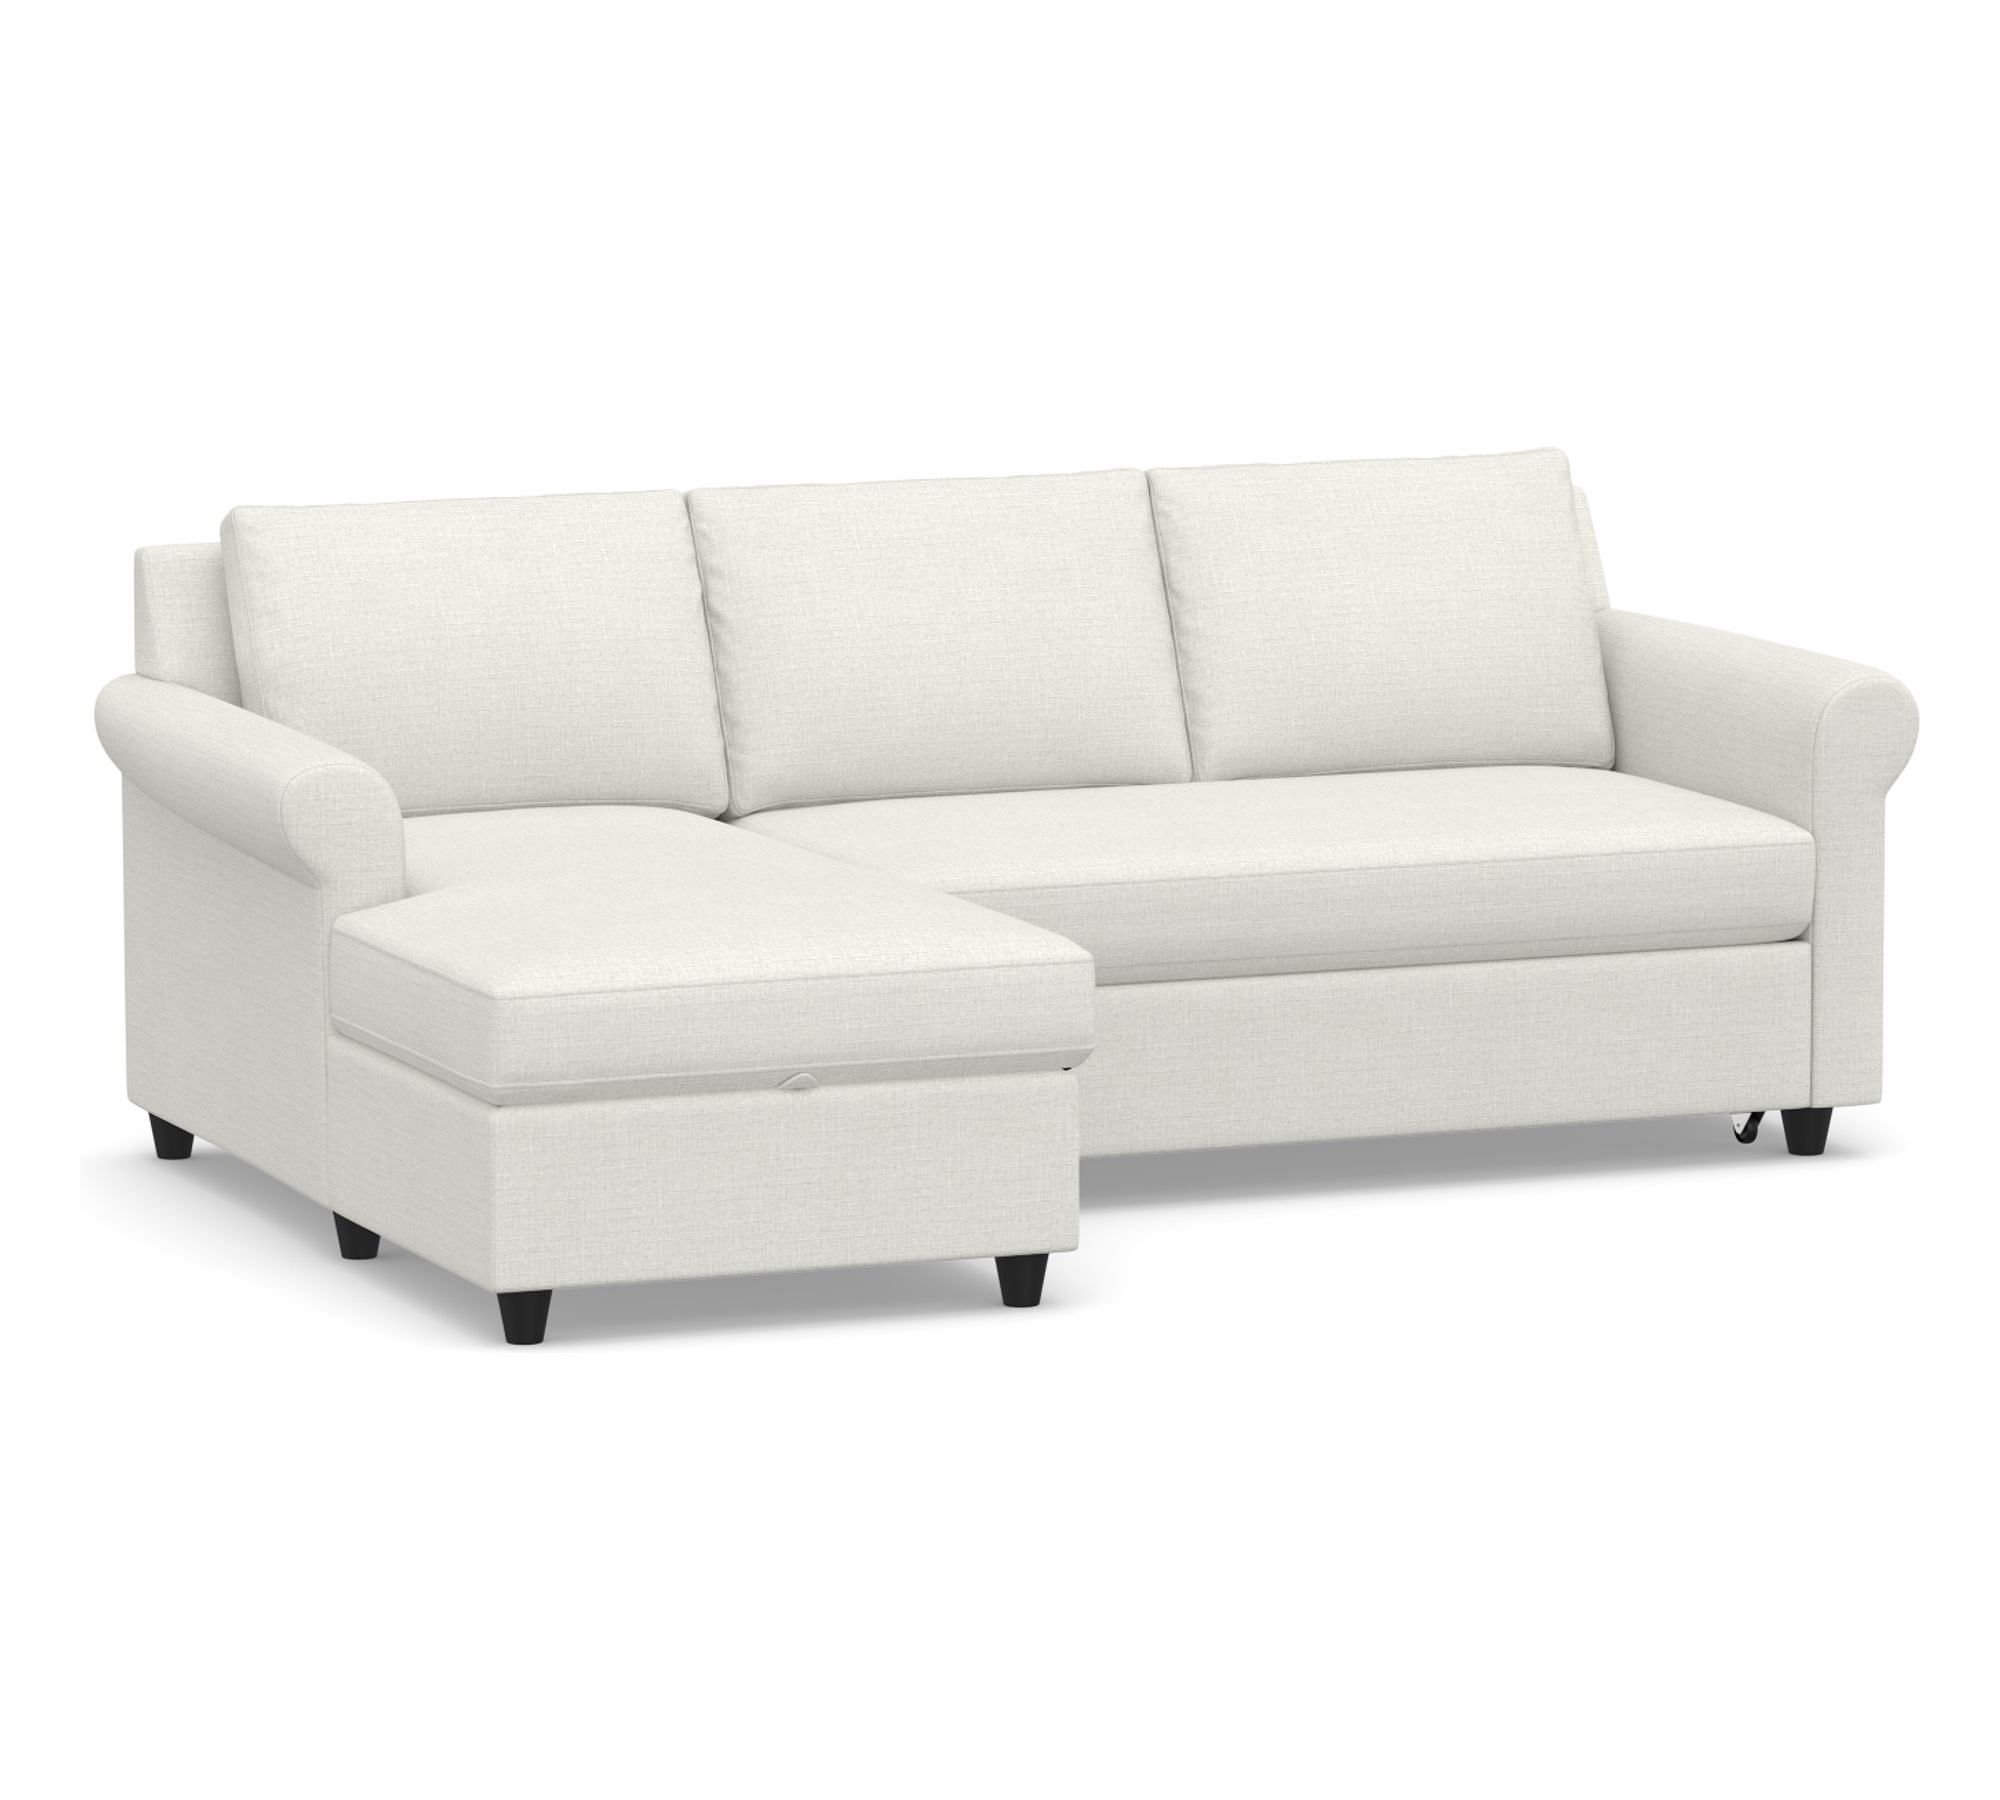 Sanford Roll Arm Trundle Sleeper Chaise Sectional - Storage Available (92")